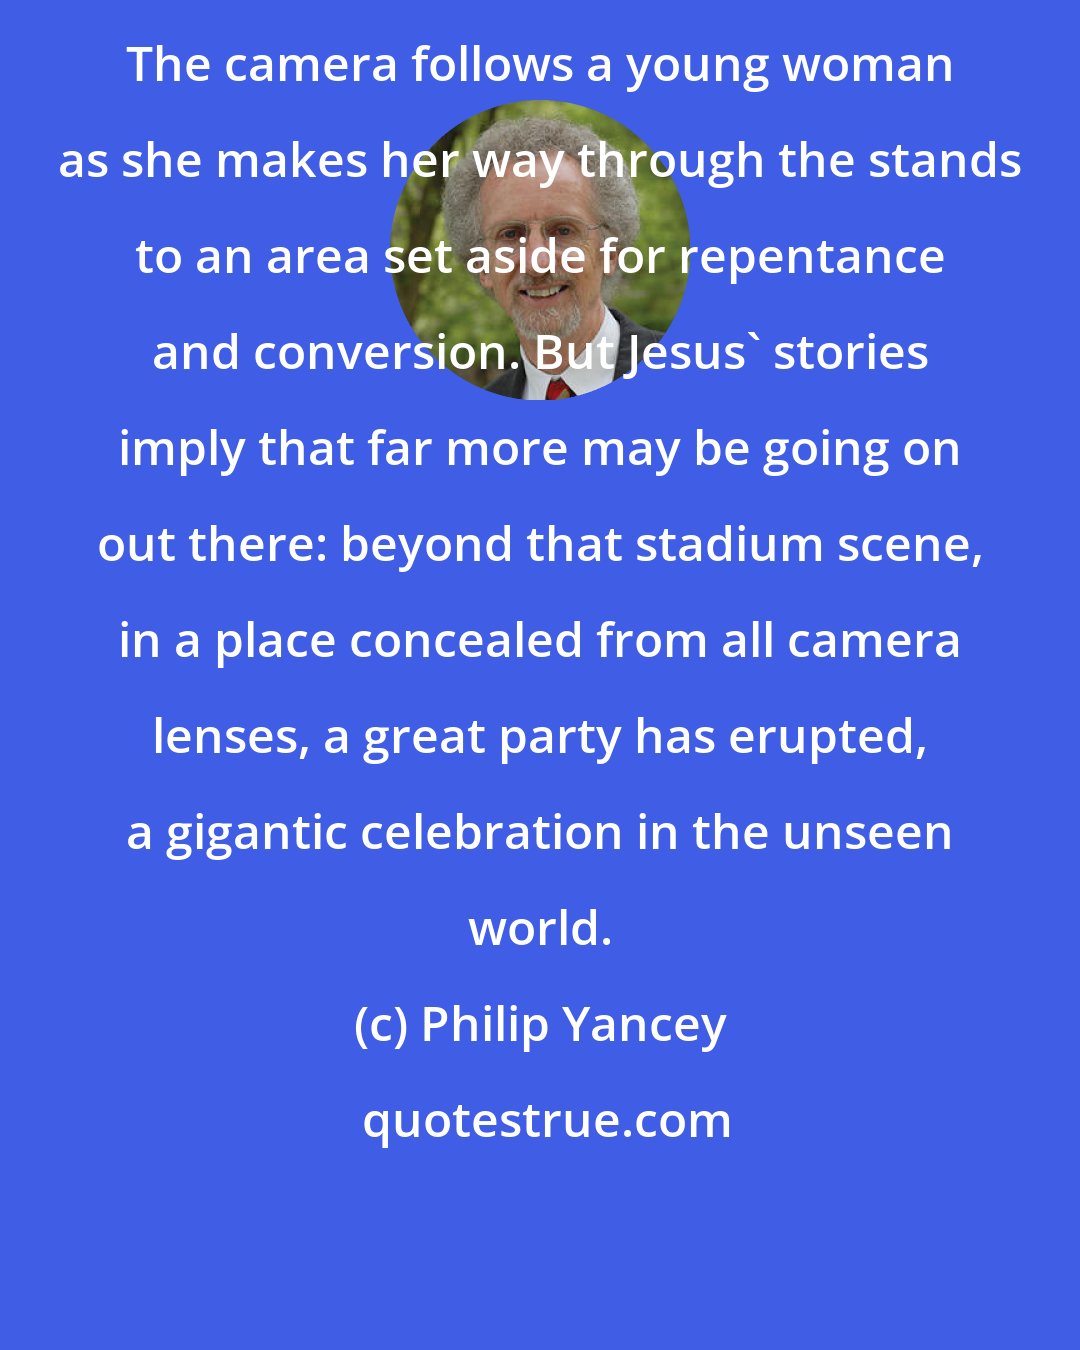 Philip Yancey: The camera follows a young woman as she makes her way through the stands to an area set aside for repentance and conversion. But Jesus' stories imply that far more may be going on out there: beyond that stadium scene, in a place concealed from all camera lenses, a great party has erupted, a gigantic celebration in the unseen world.